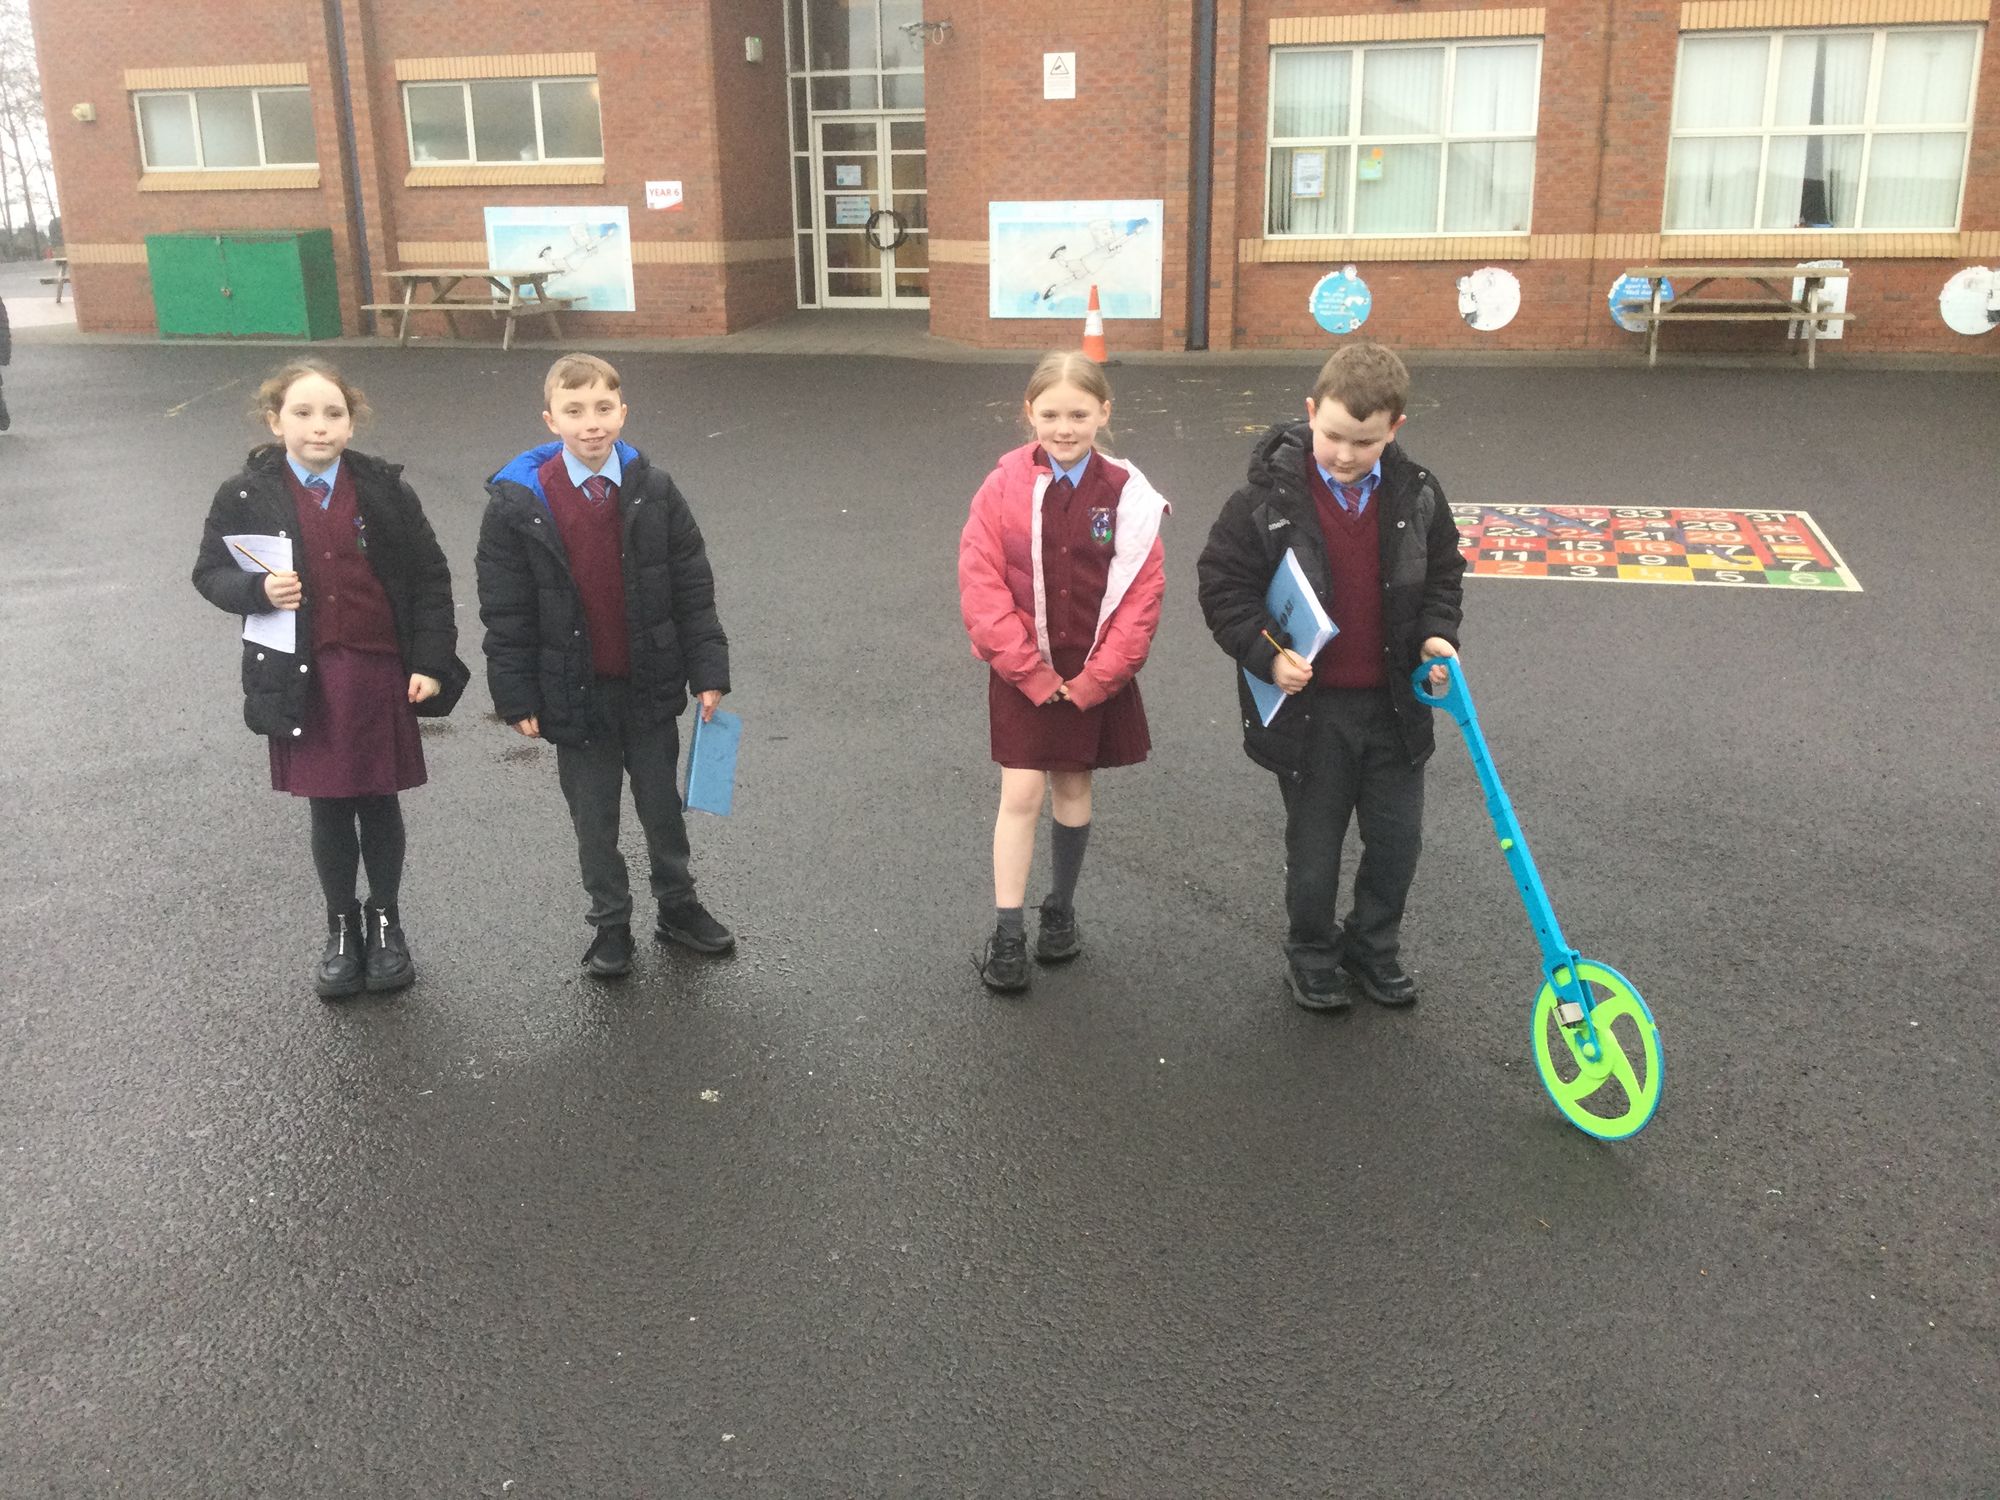 Measuring Length activities in Year 5B